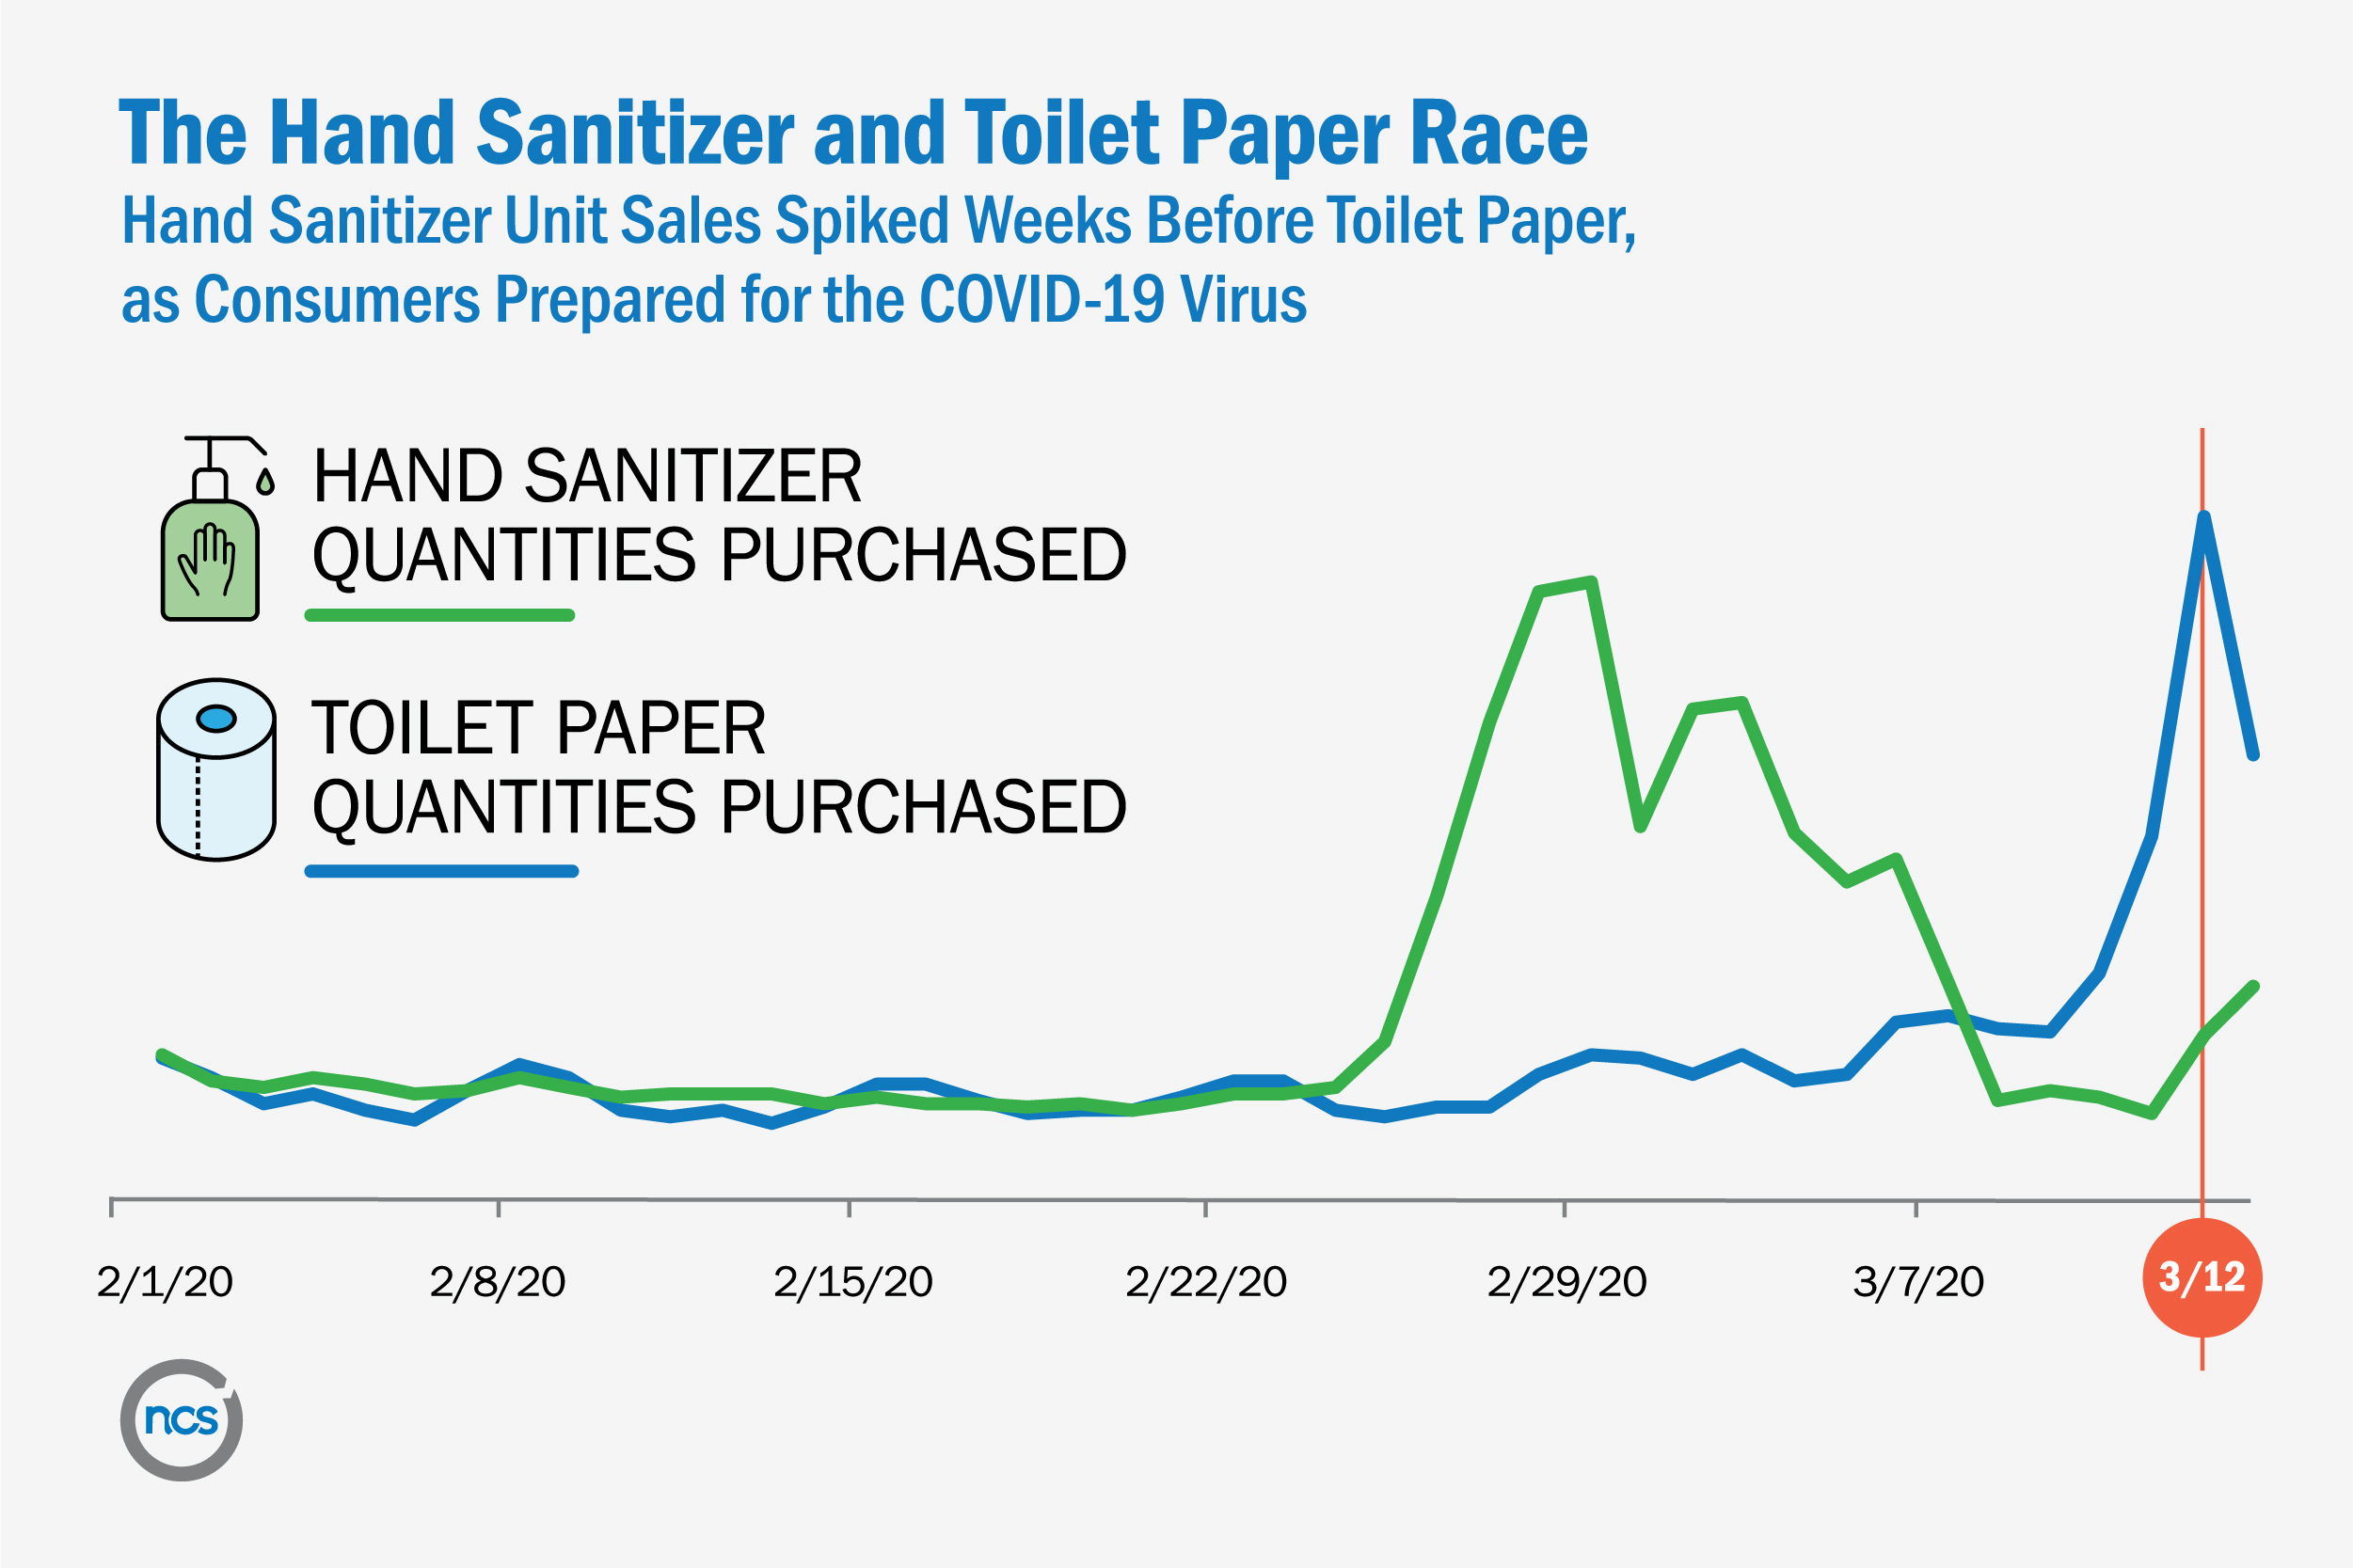 Hand sanitizer unit sales spiked weeks before toilet paper as consumers prepared for the COVID-19 virus.